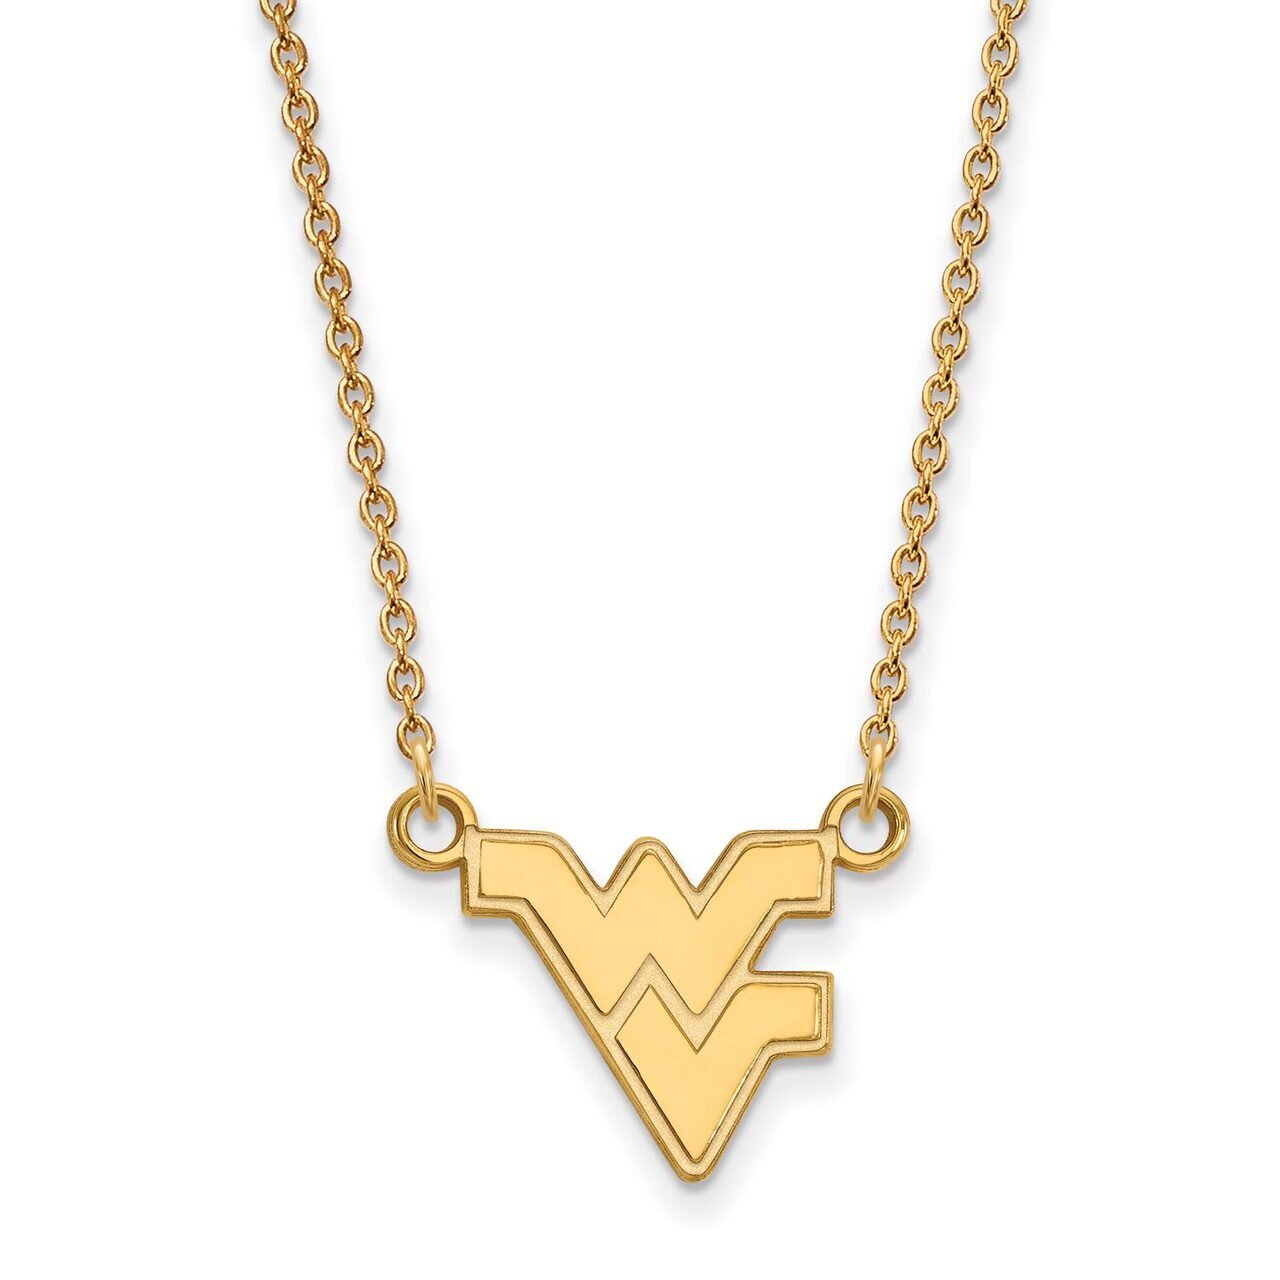 West Virginia University Small Pendant with Chain Necklace 14k Yellow Gold 4Y015WVU-18